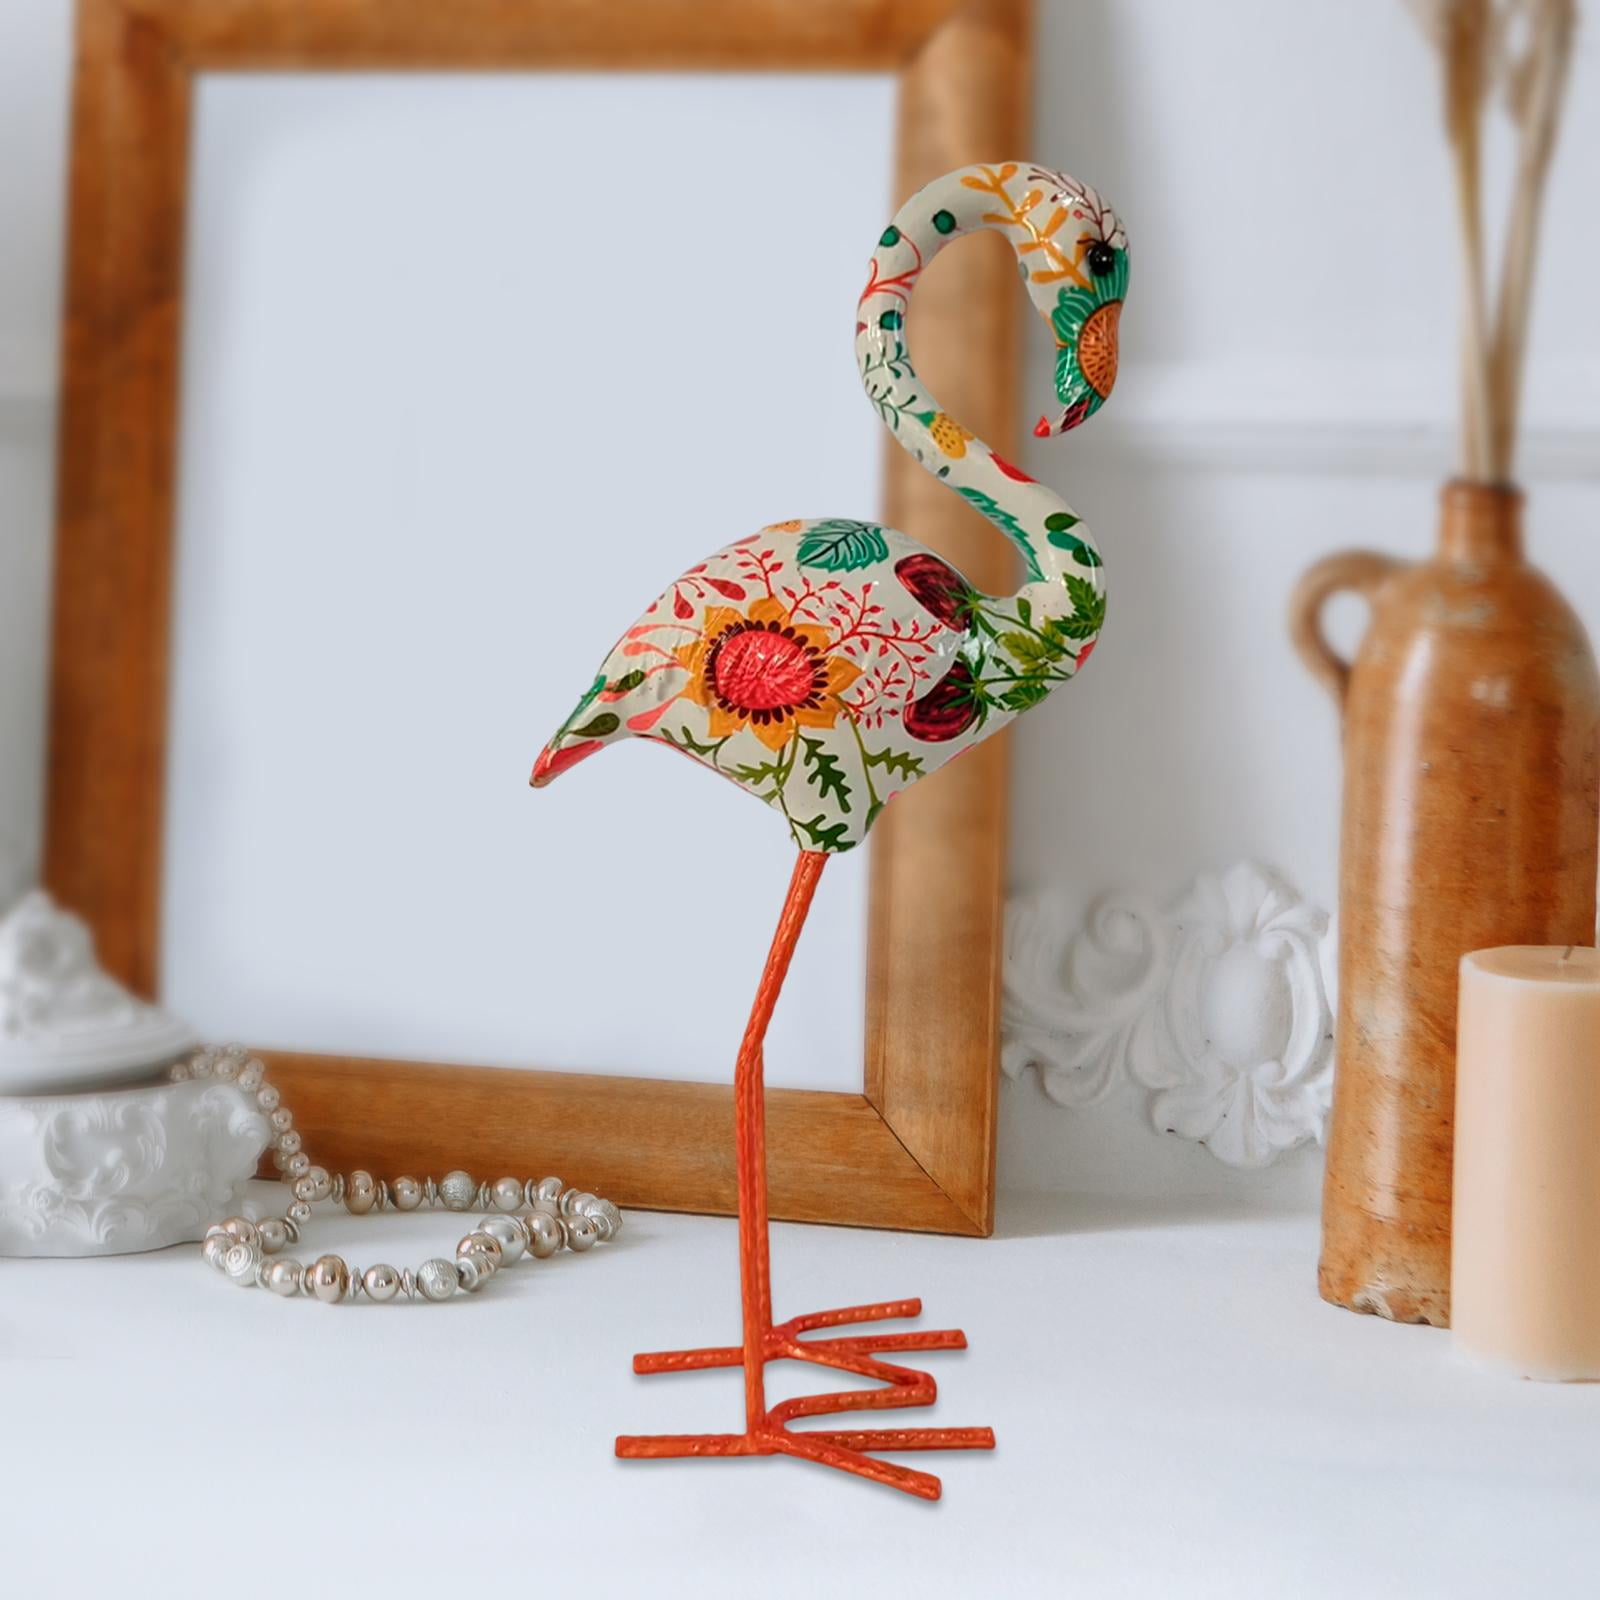 Flamingo Figurines Animal Statues Resin Glasses Stand Creative Sunglasses  Holder Container Desktop Home Decor Birthday Gifts